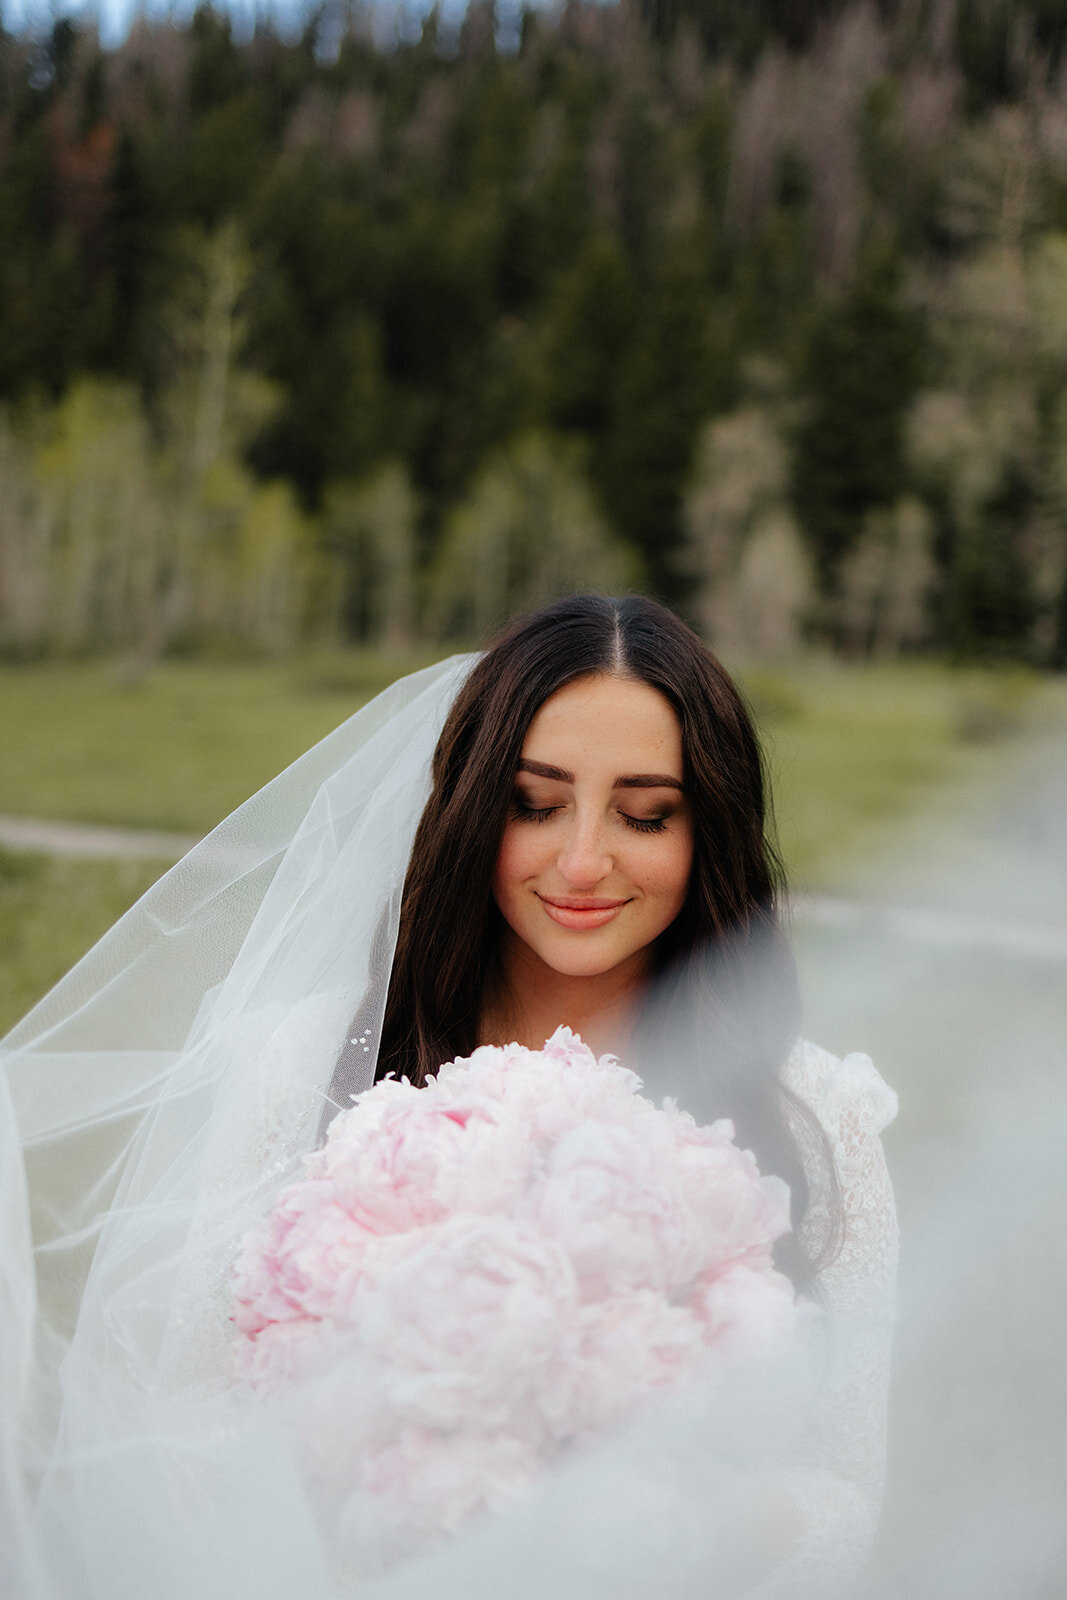 Utah mountain bridal shoot with bride holding pink peonies bouquet.